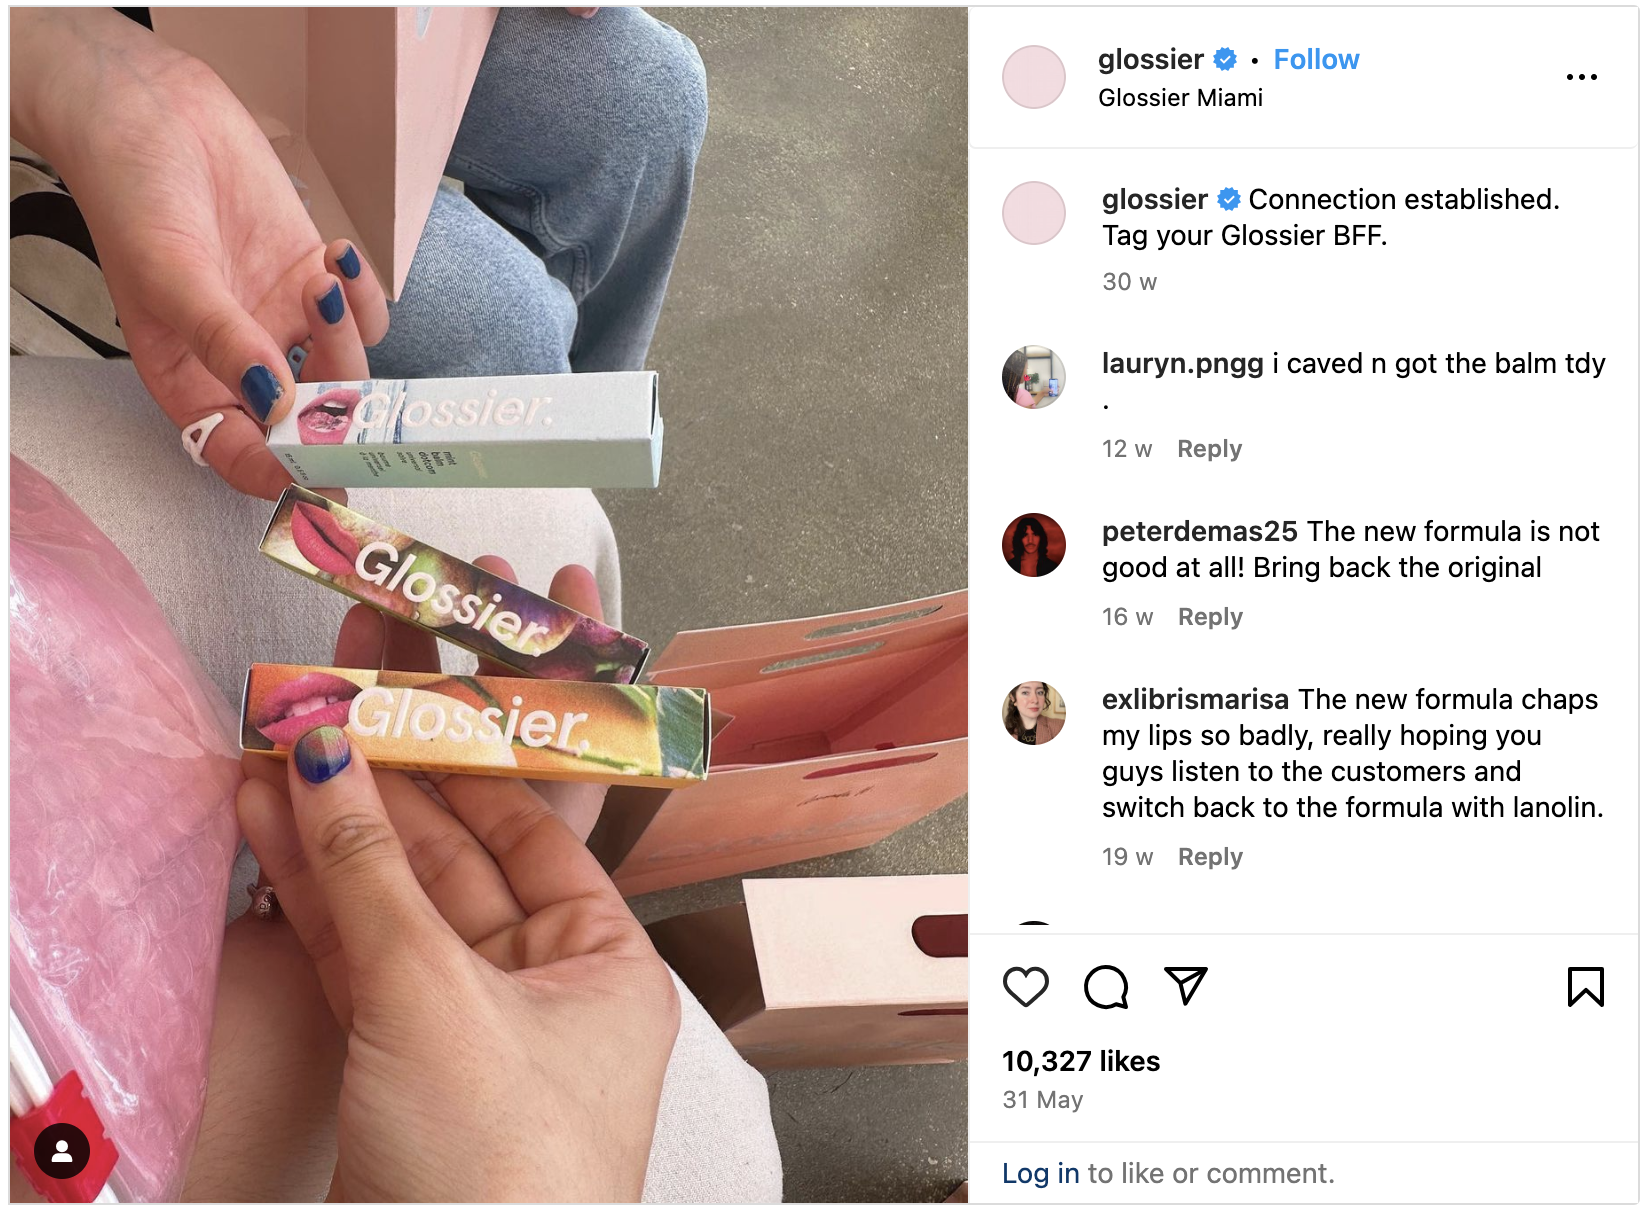 A tag-a-friend contest run by Glossier on Instagram